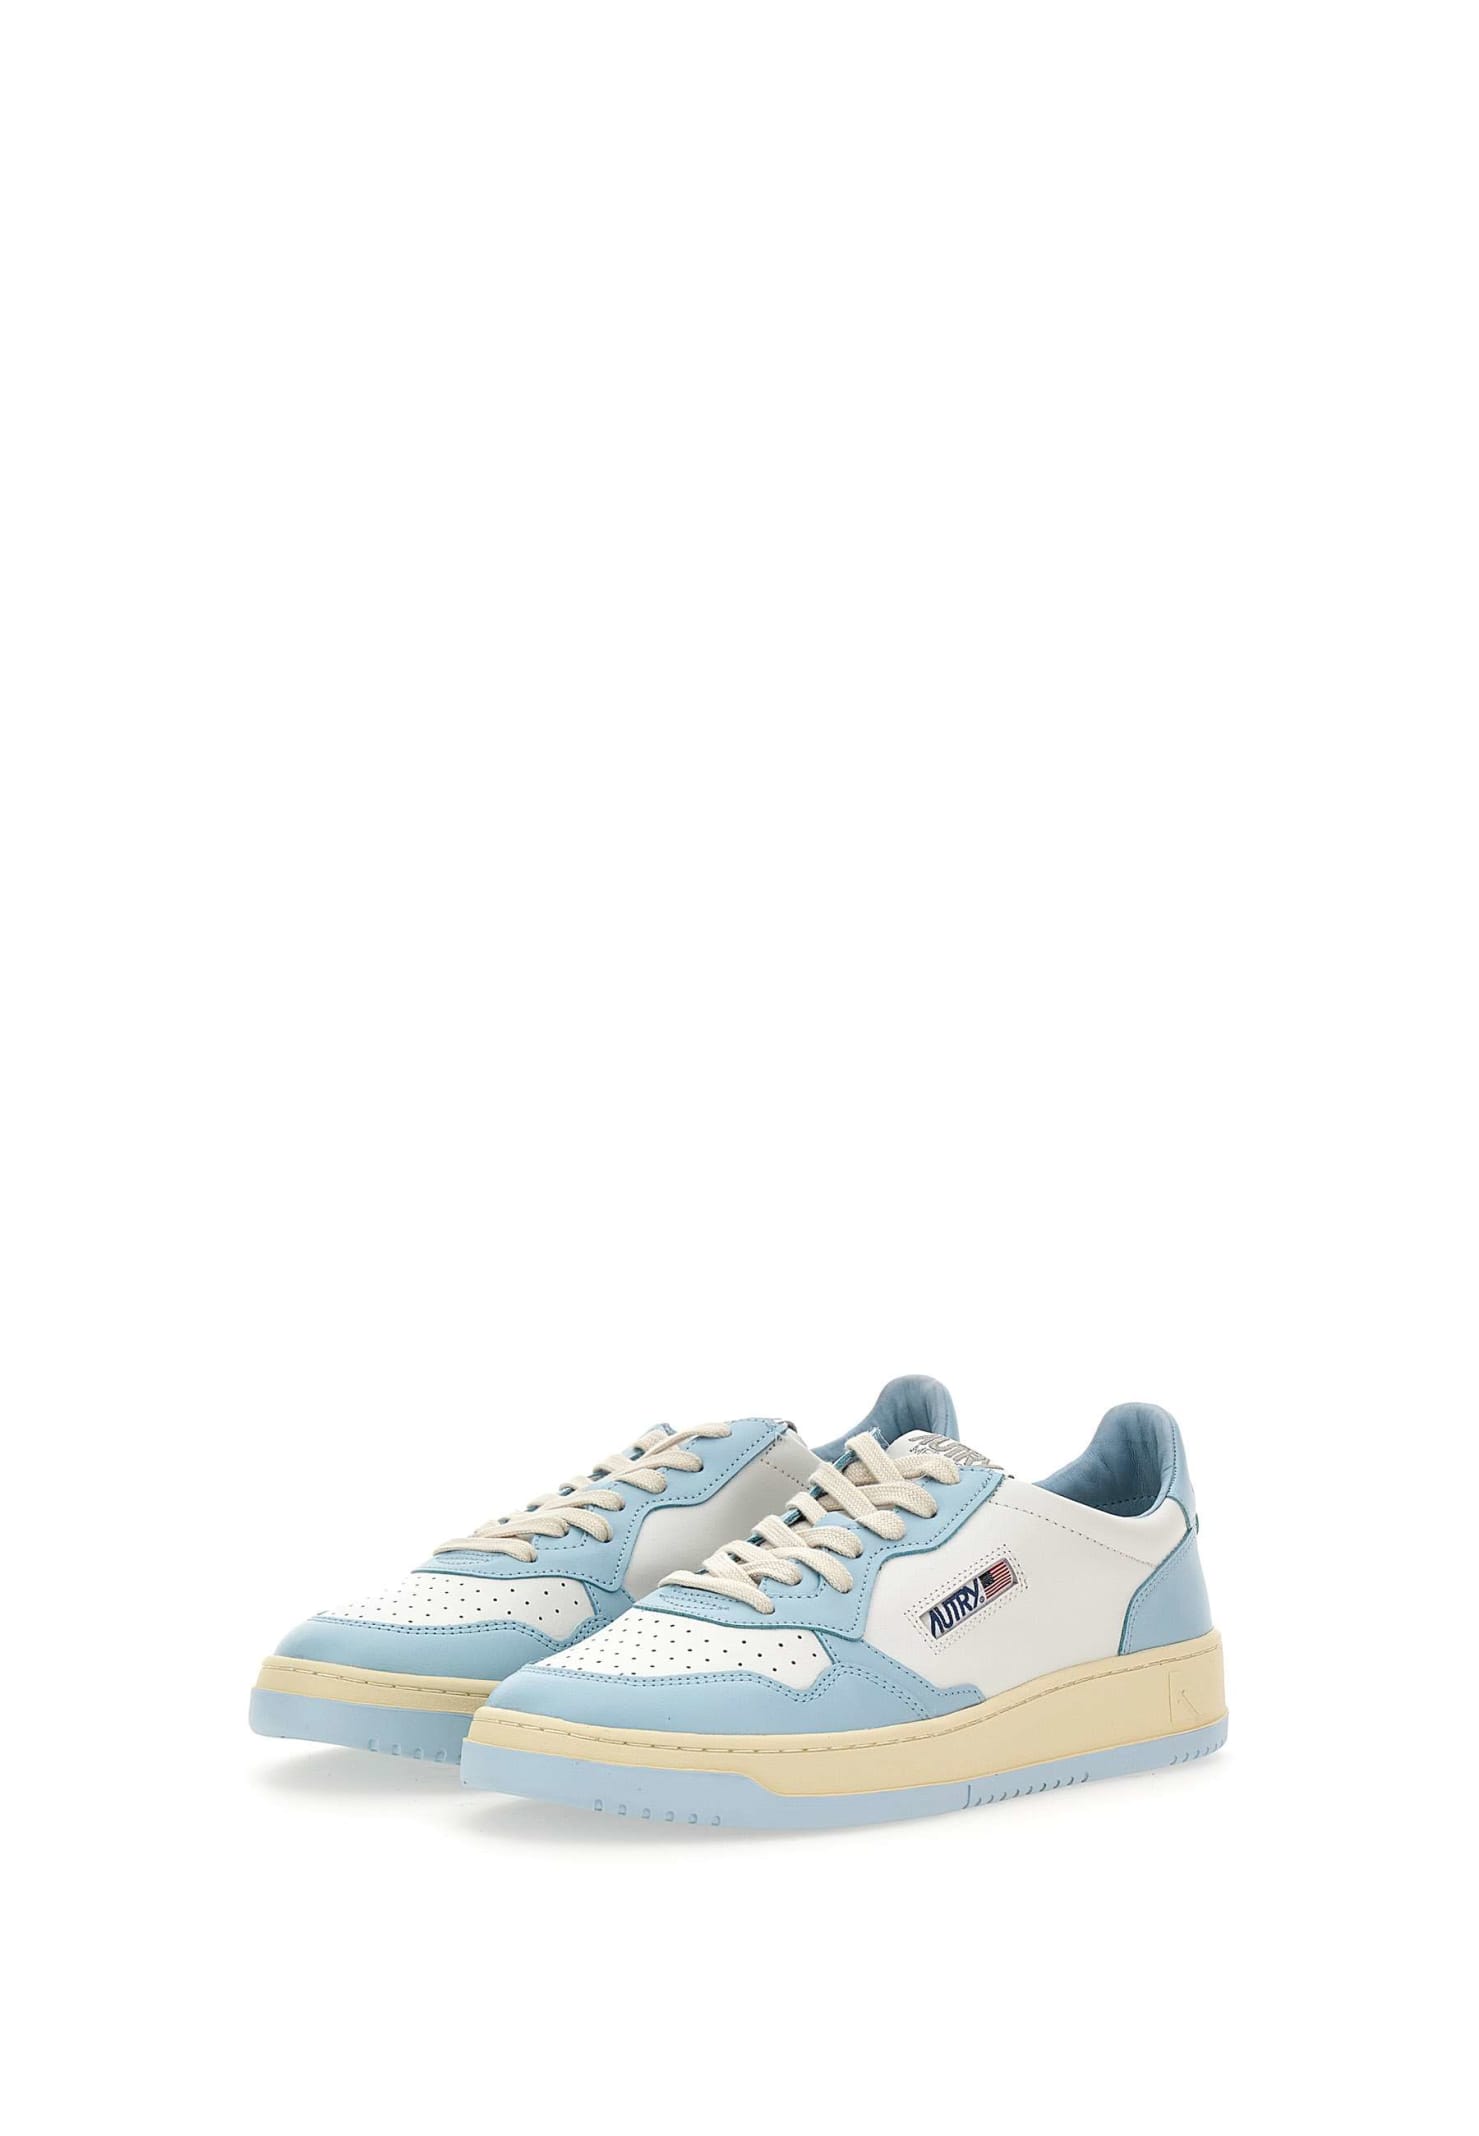 Shop Autry Aulm Wb40 Sneakers In White-blue